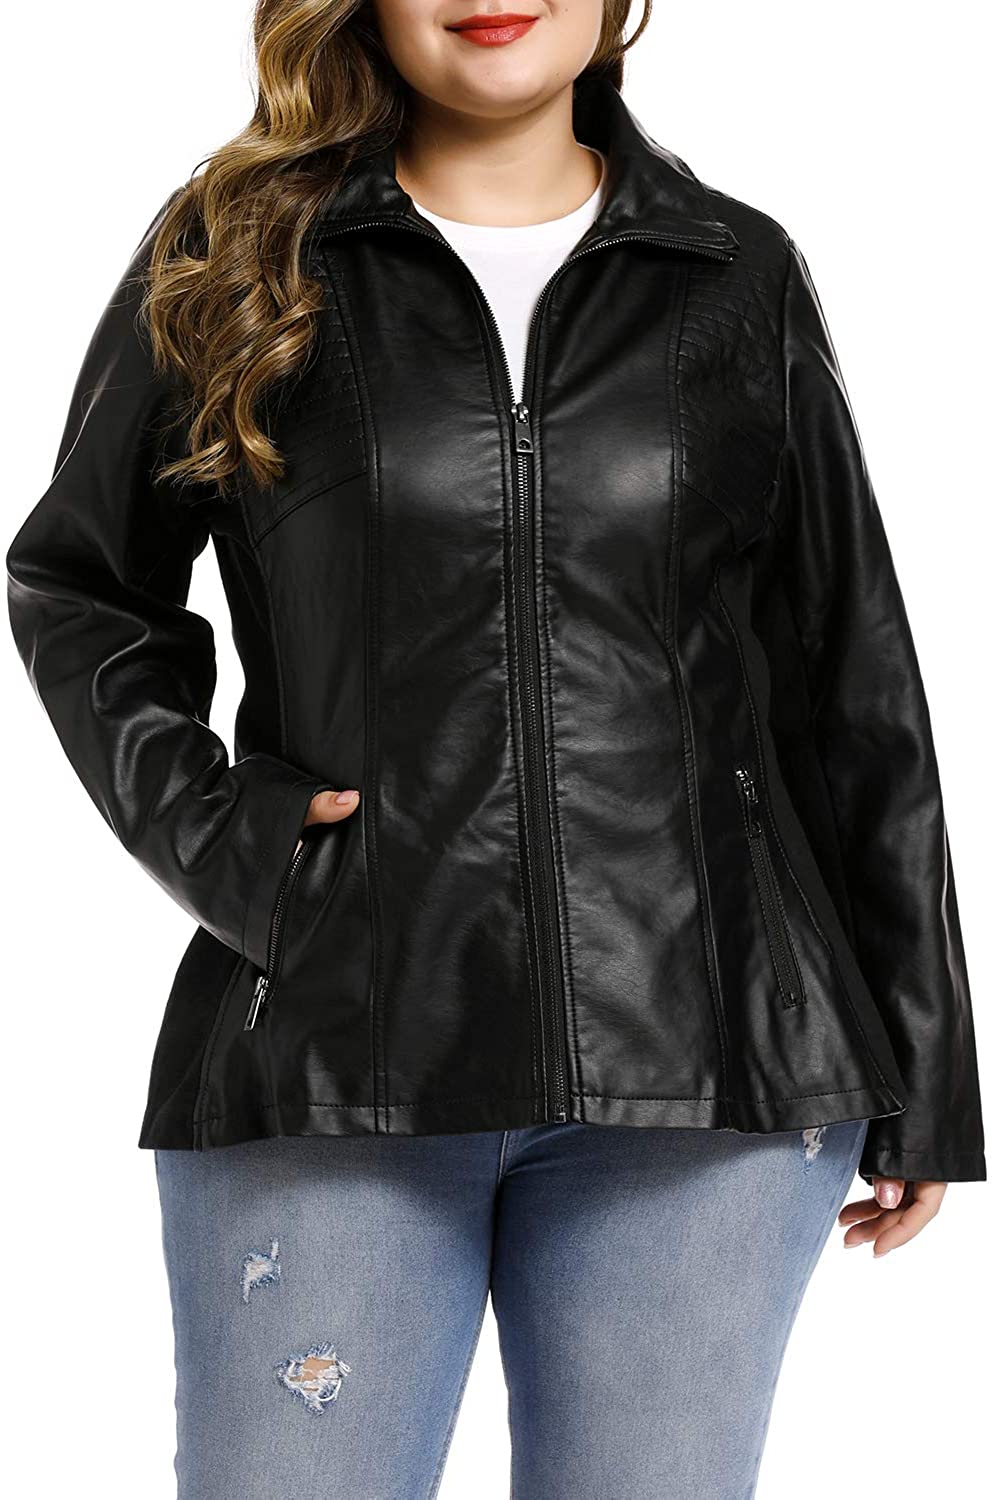 S P Y M Womens Casual Plus Size Faux Leather Fashion Quilted Moto Jacket 